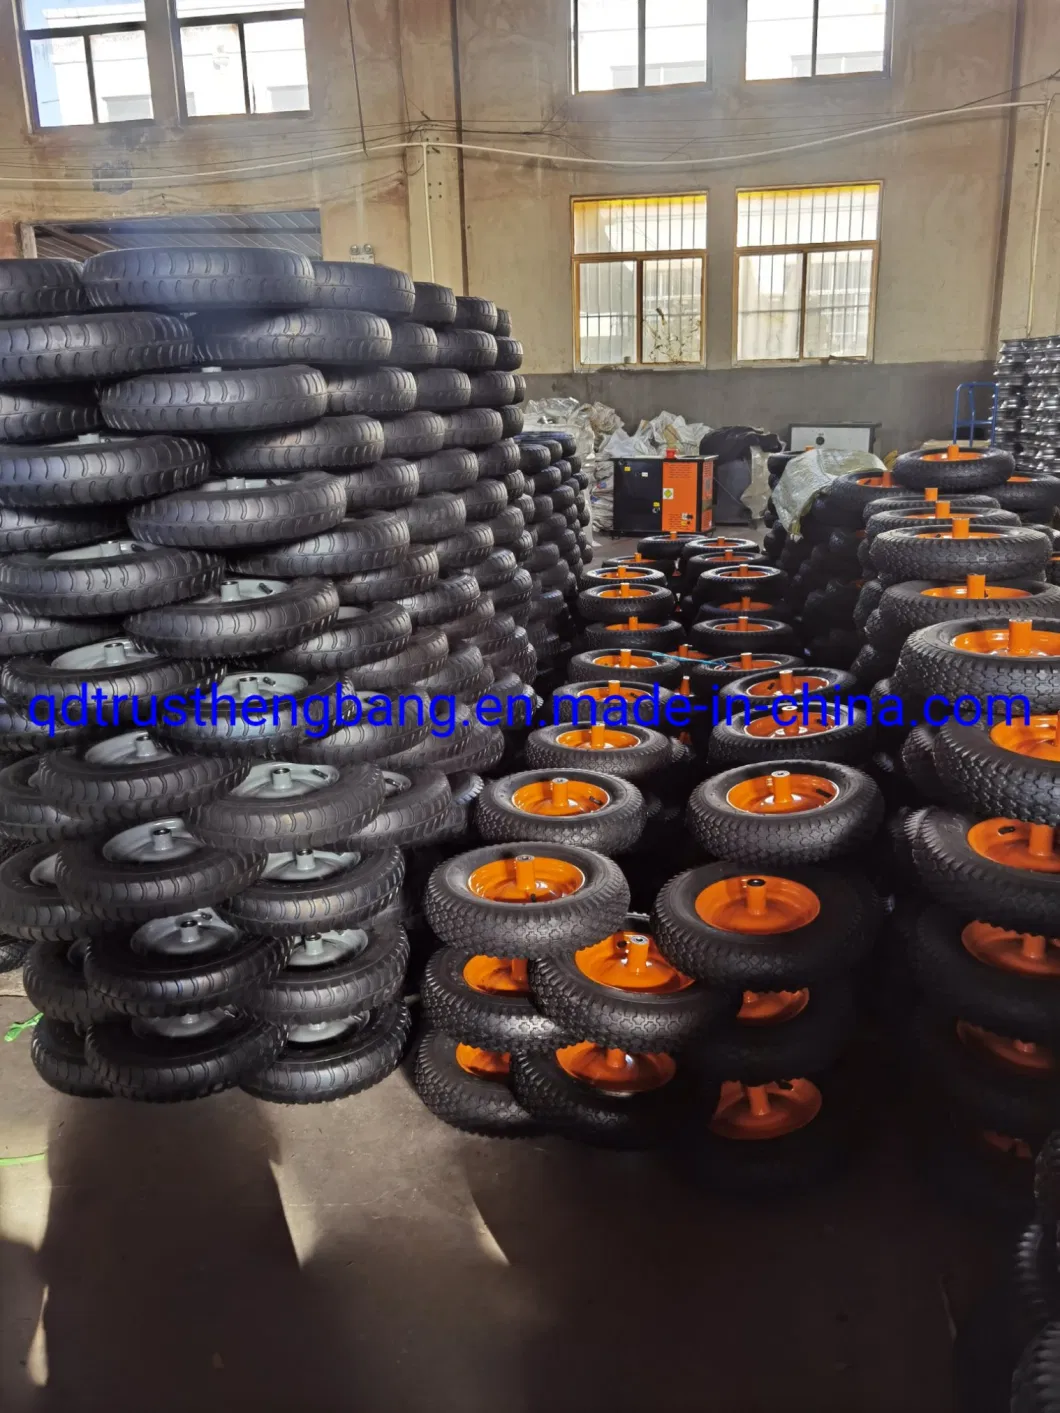 Tyres Tires for Rubber Wheel Pneumatic Wheel with Plastic Rim for Wheelbarrows, Hand Trolleys, Tool Carts